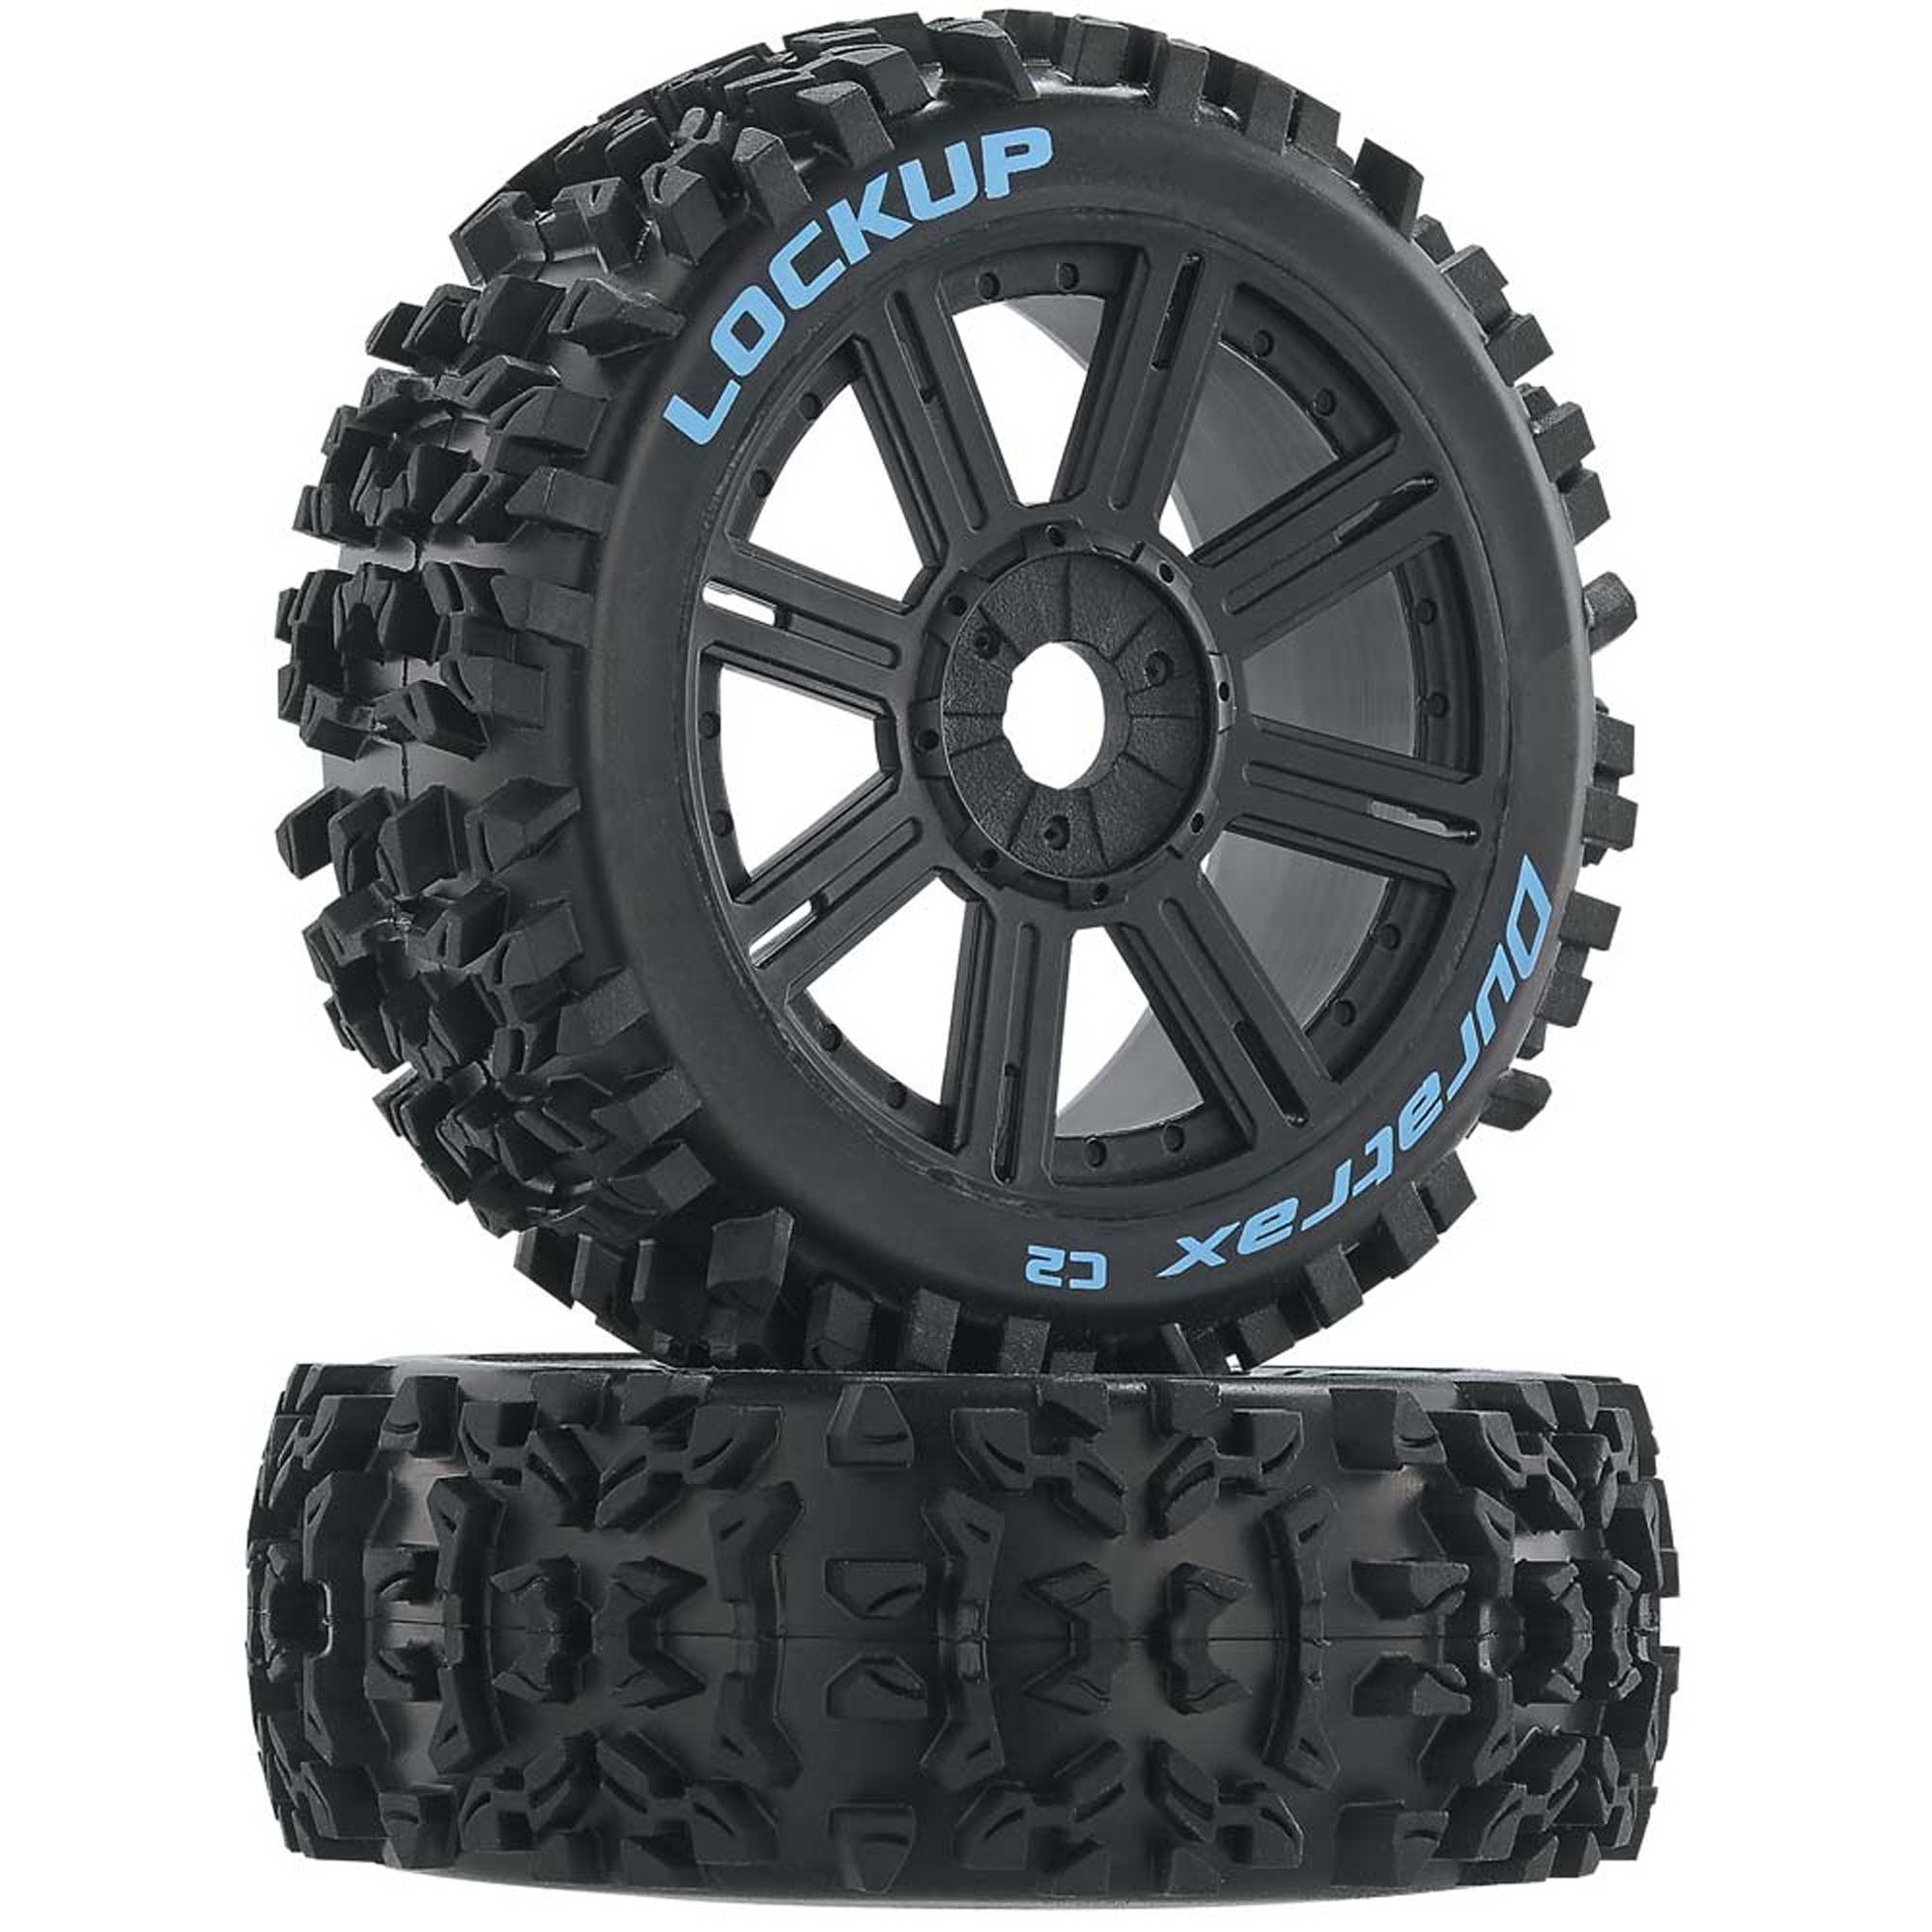 Set of 2 Unmounted Duratrax Lockup 1:8 Scale RC Buggy Tires with Foam Inserts C2 Soft Compound 